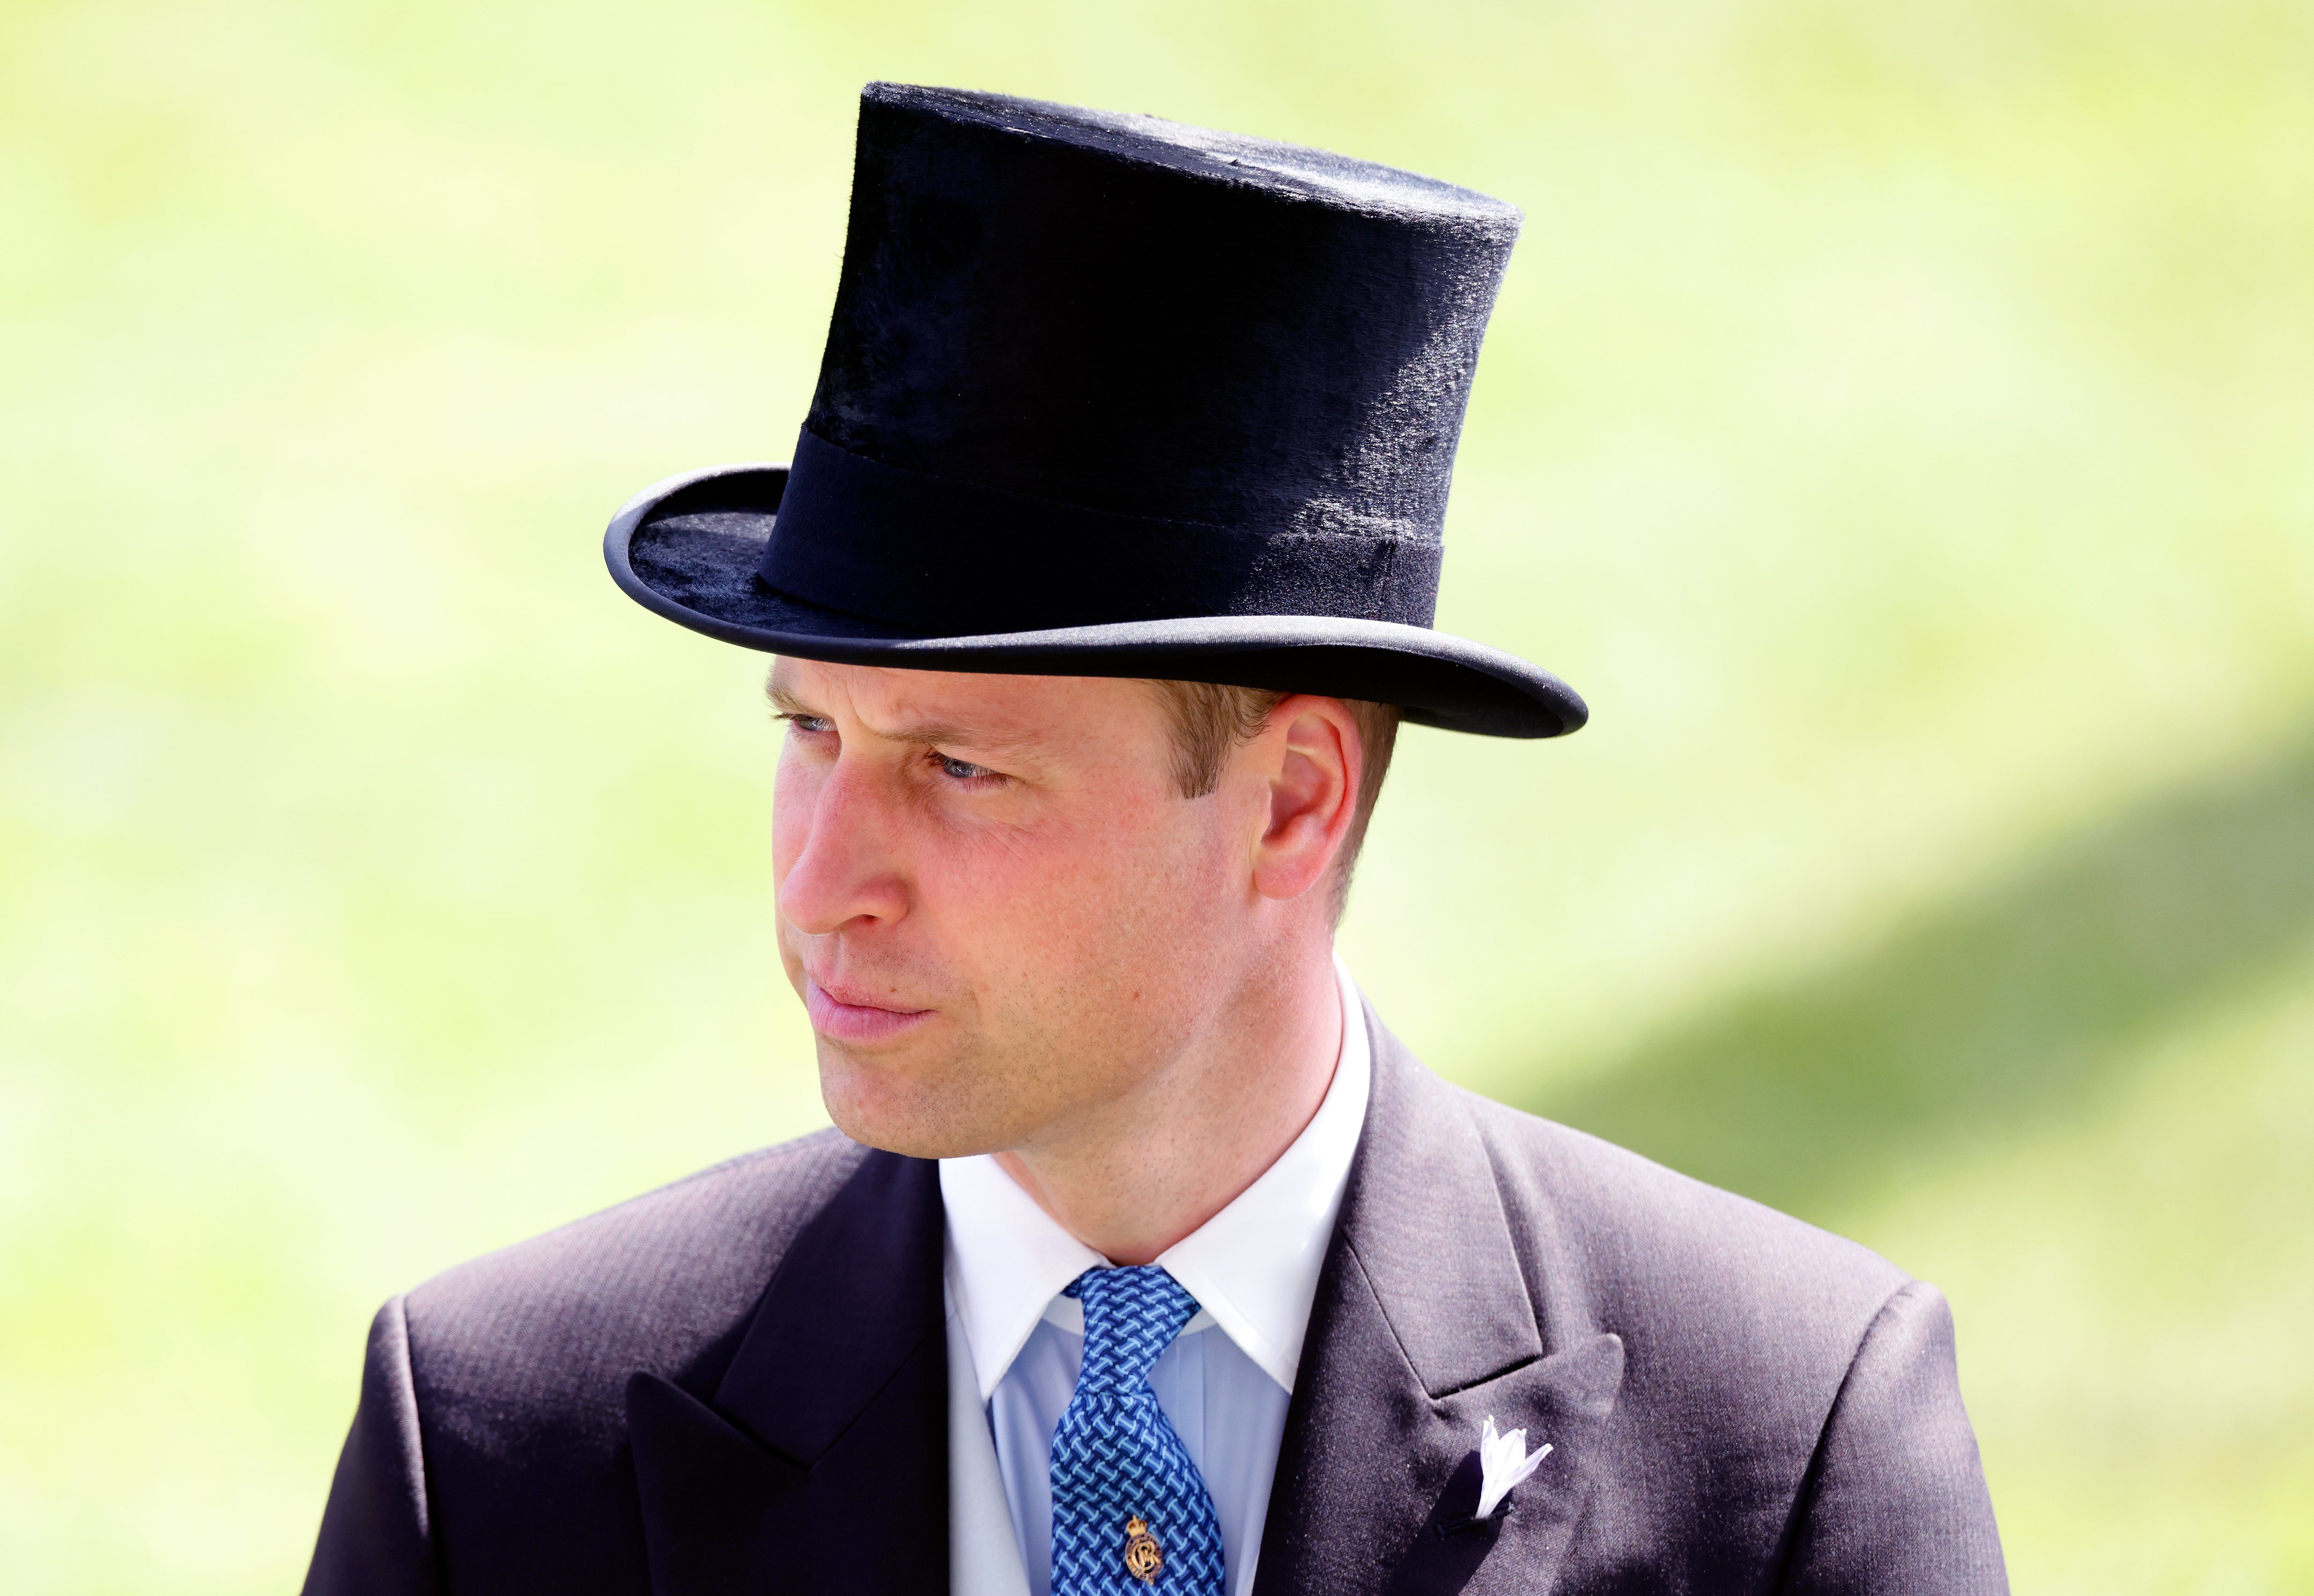  Prince William, Duke of Cambridge during day 4 of Royal Ascot at Ascot Racecourse on June 17, 2022 in Ascot, England. / Source: Getty Images